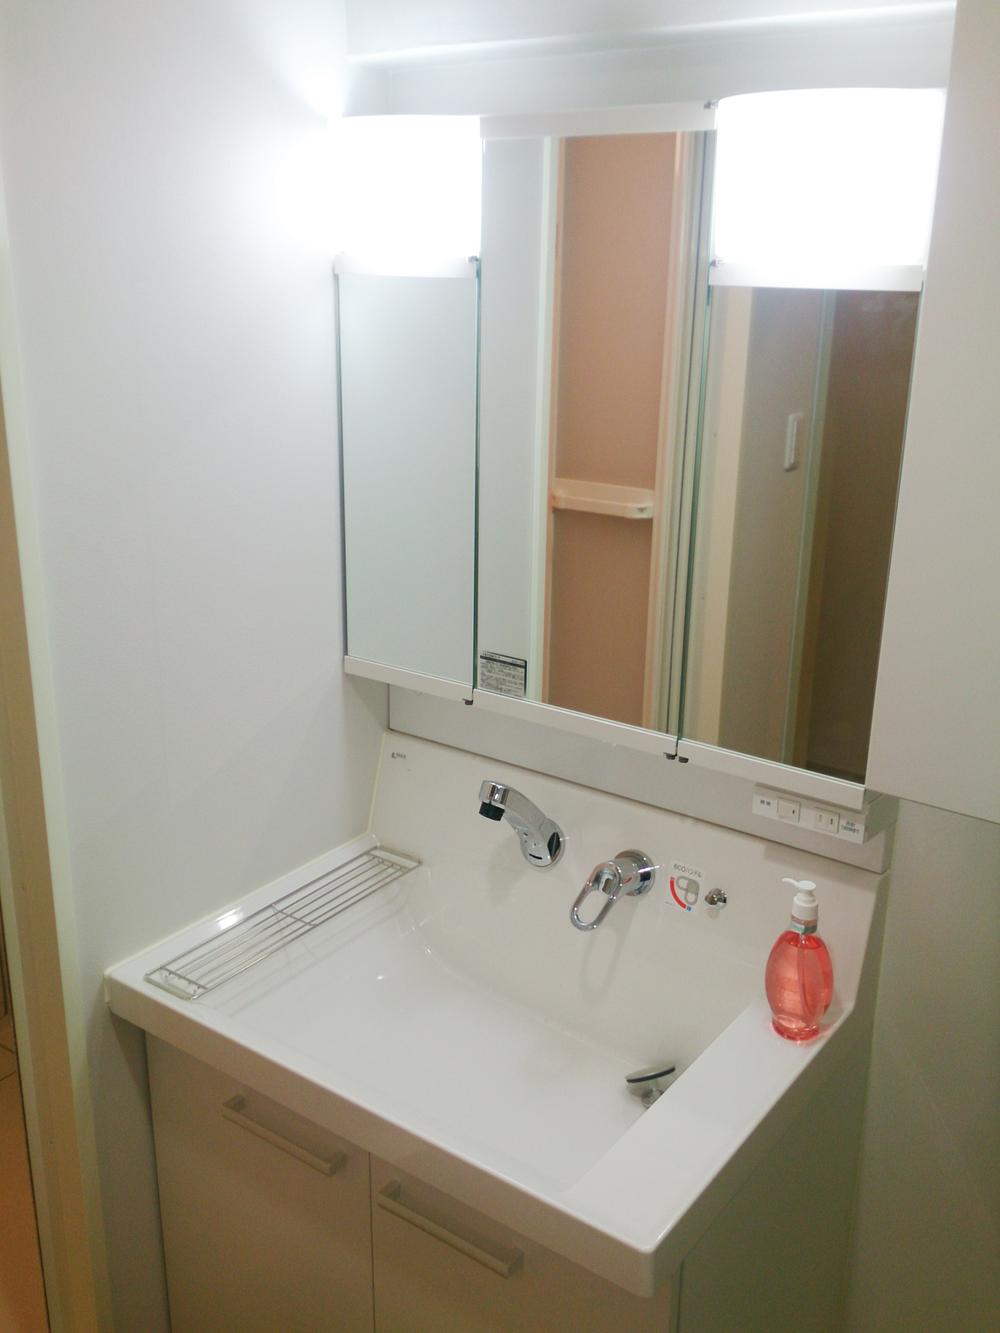 Wash basin, toilet. Renovation already washroom to clean It is a new article.